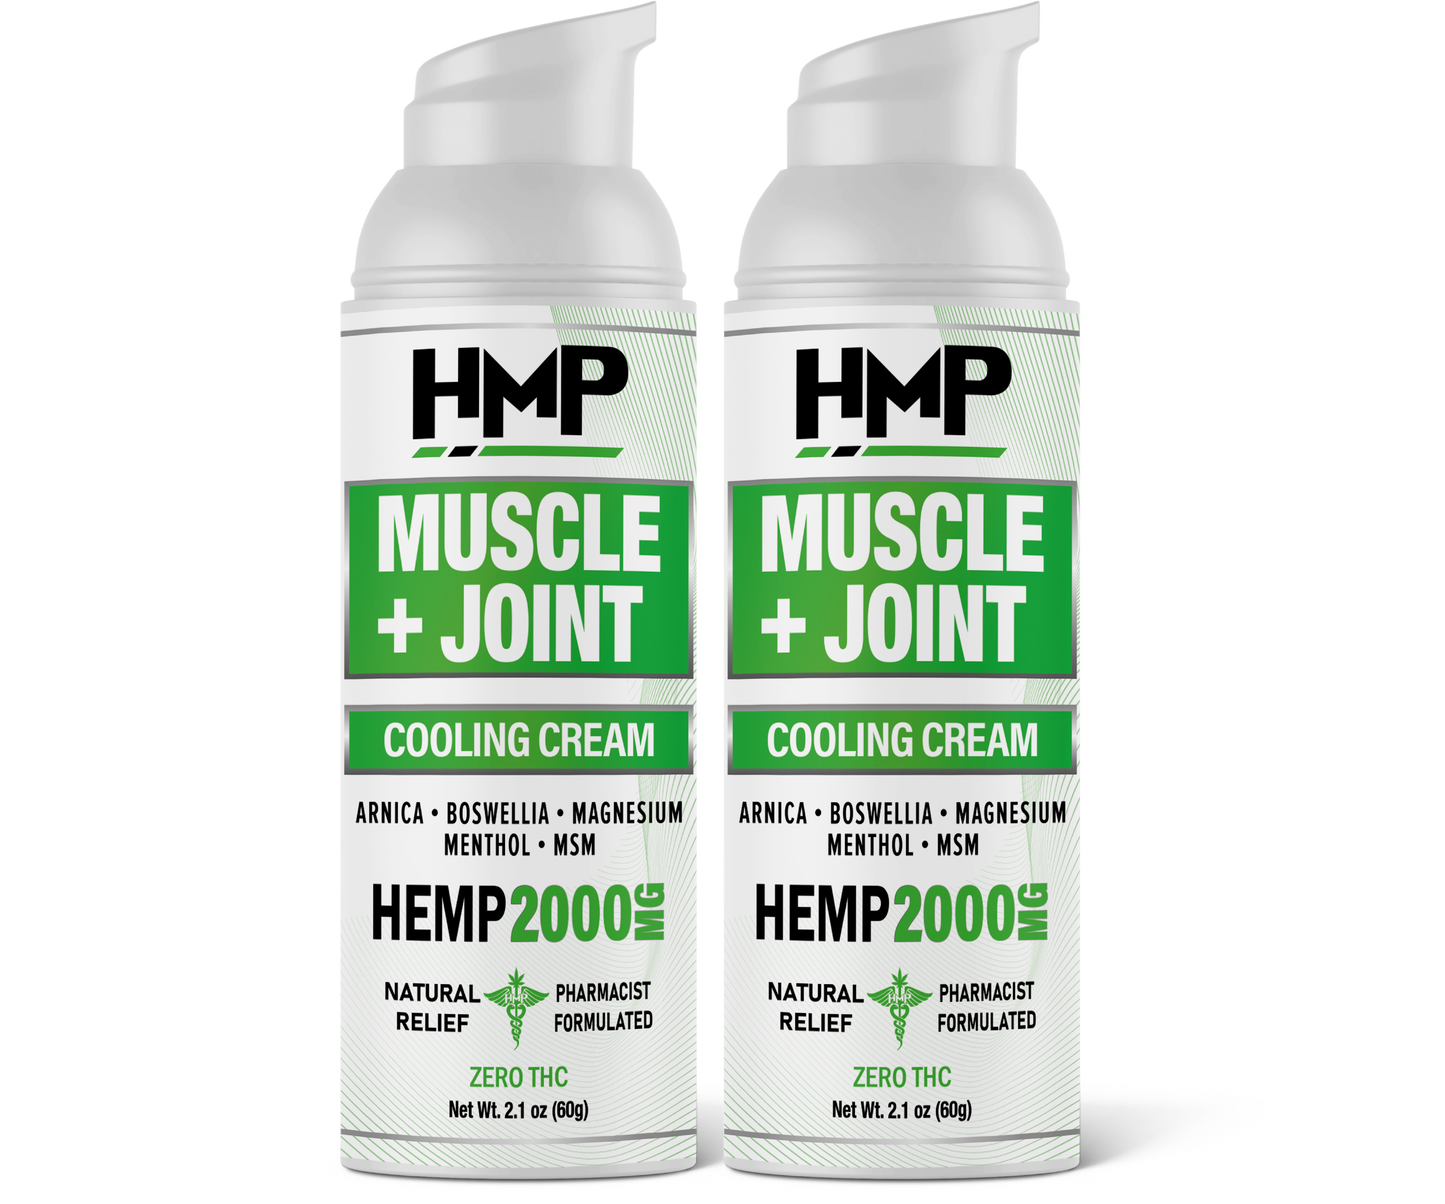 HMP BRANDS MUSCLE & JOINT RECOVERY CREAM